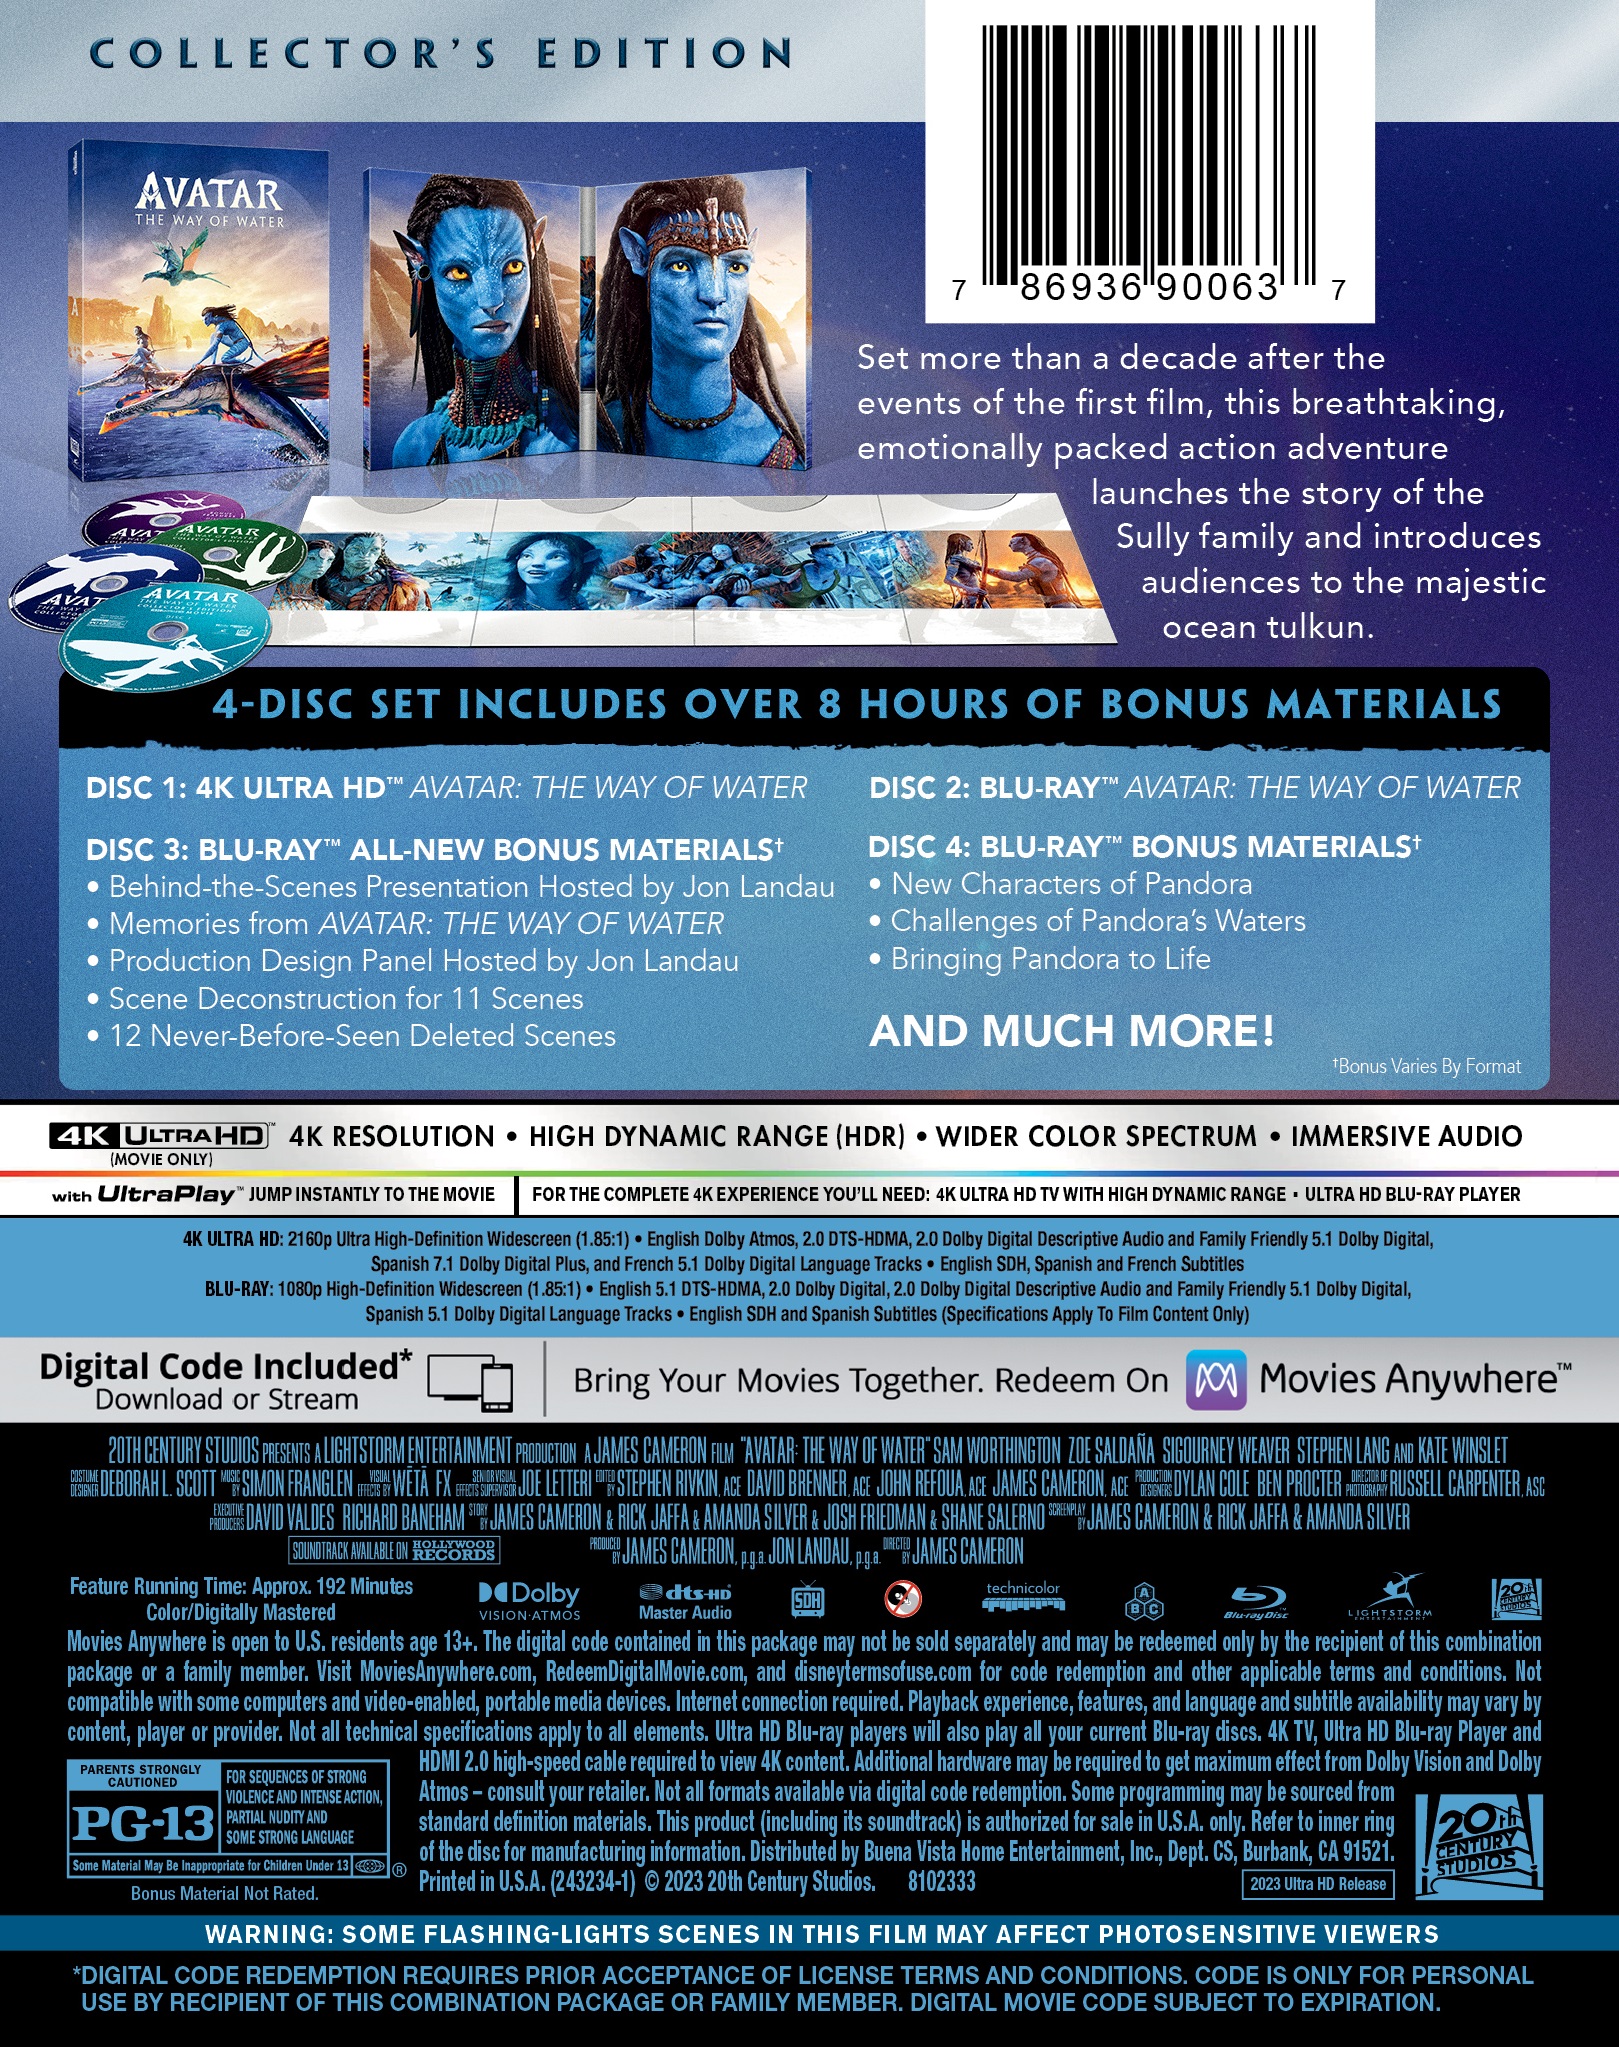 Avatar: The Way of Water 4K Collector's Edition (4K Ultra HD + Blu-ray + Digital Code) (Disney) - image 2 of 3